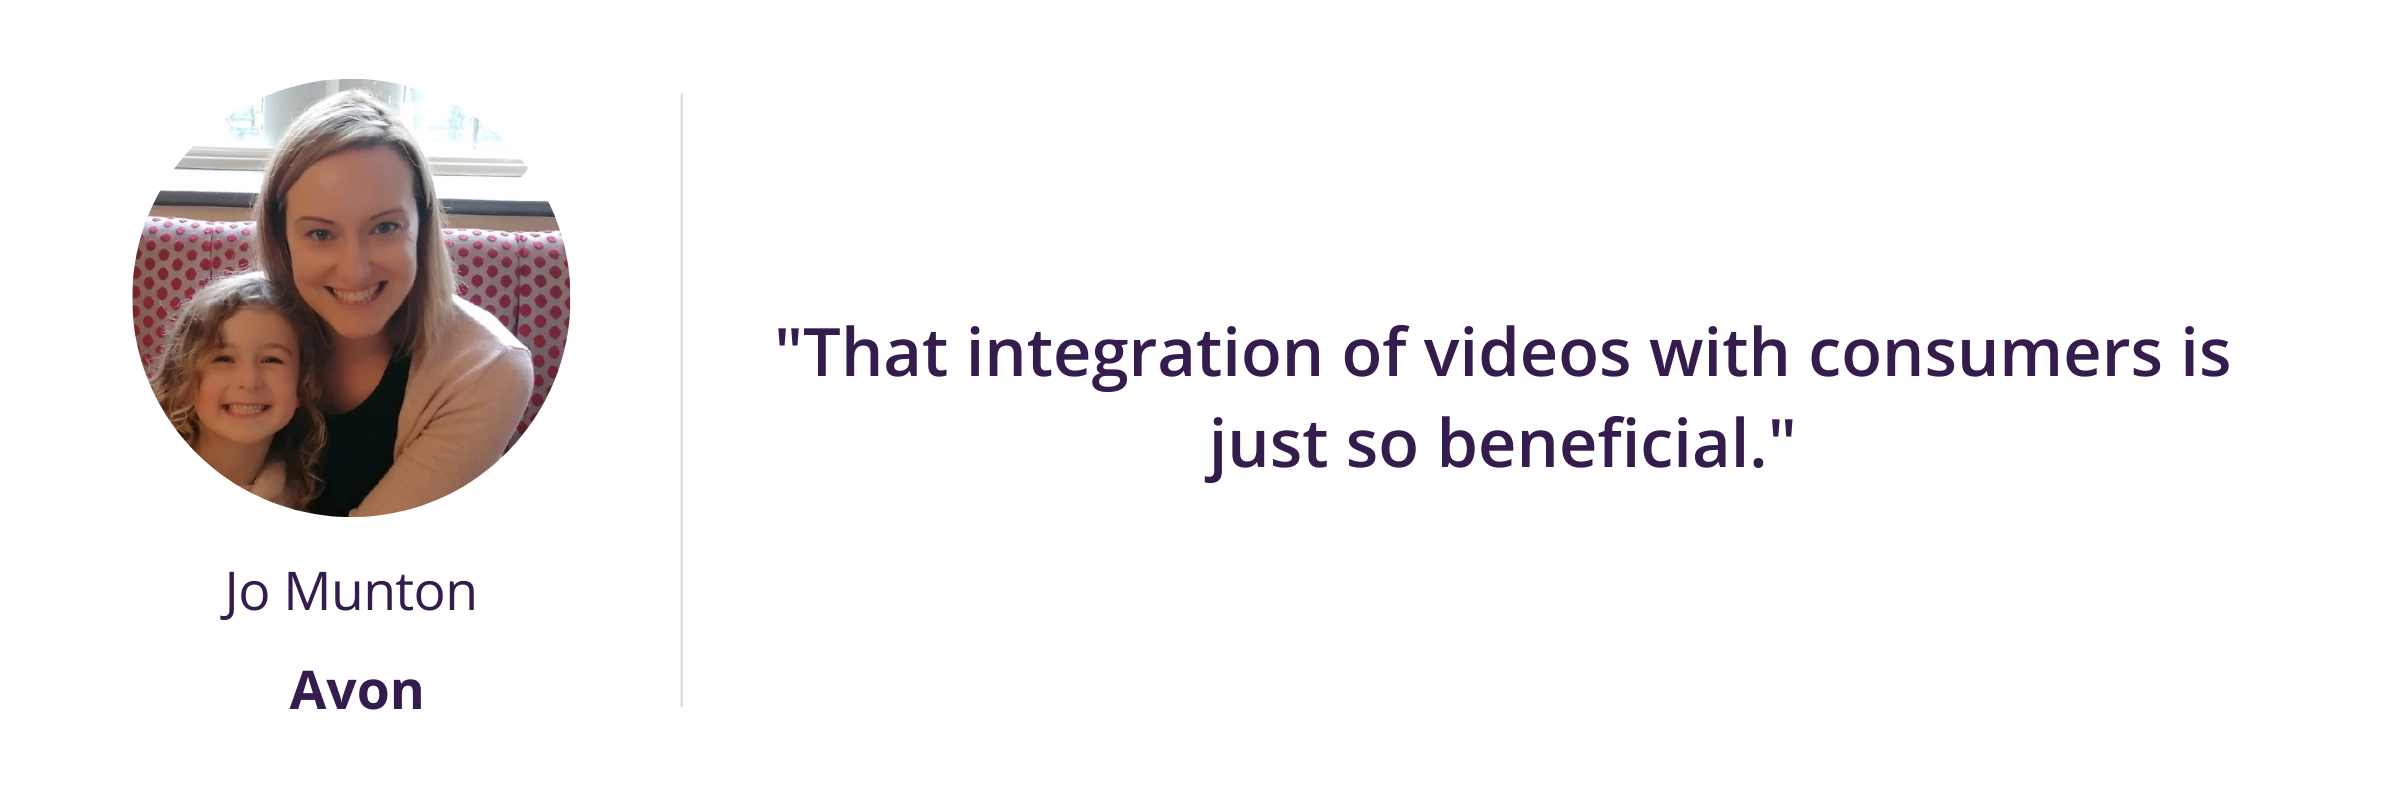 "That integration of videos with consumers is just so beneficial."